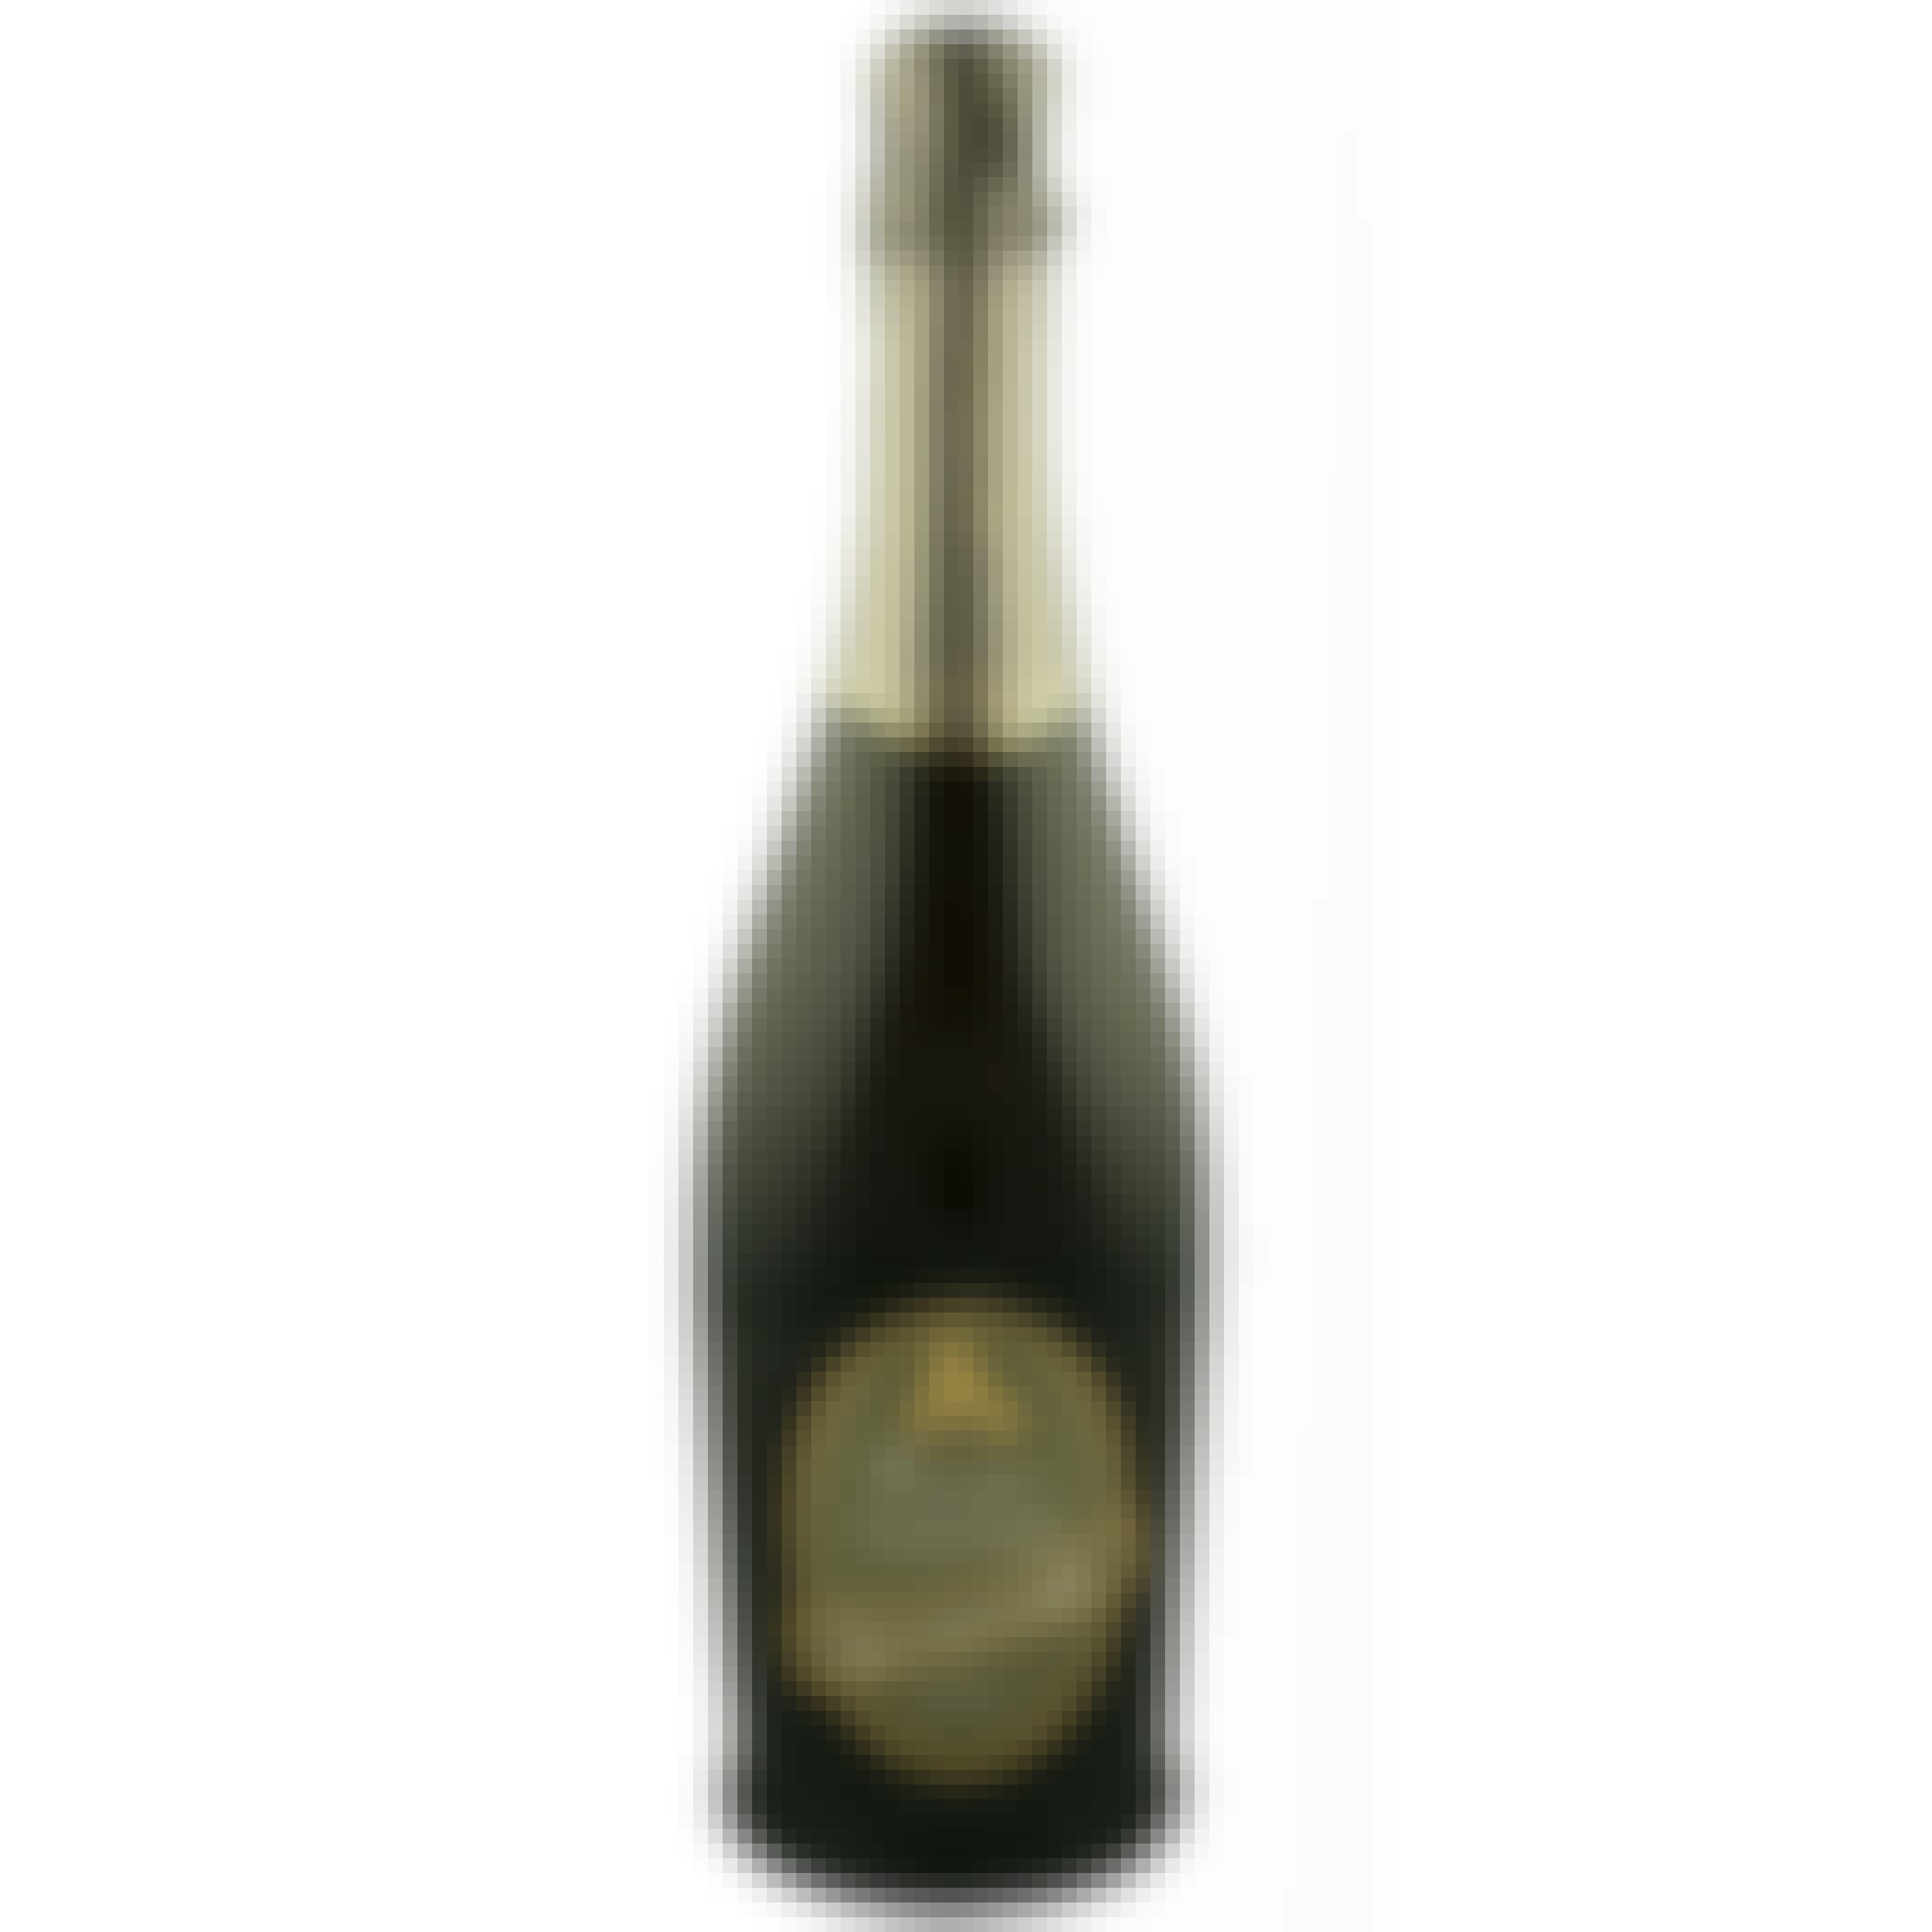 Le Colture 'Pianer' Single Vineyard Extra Dry Prosecco 750ml